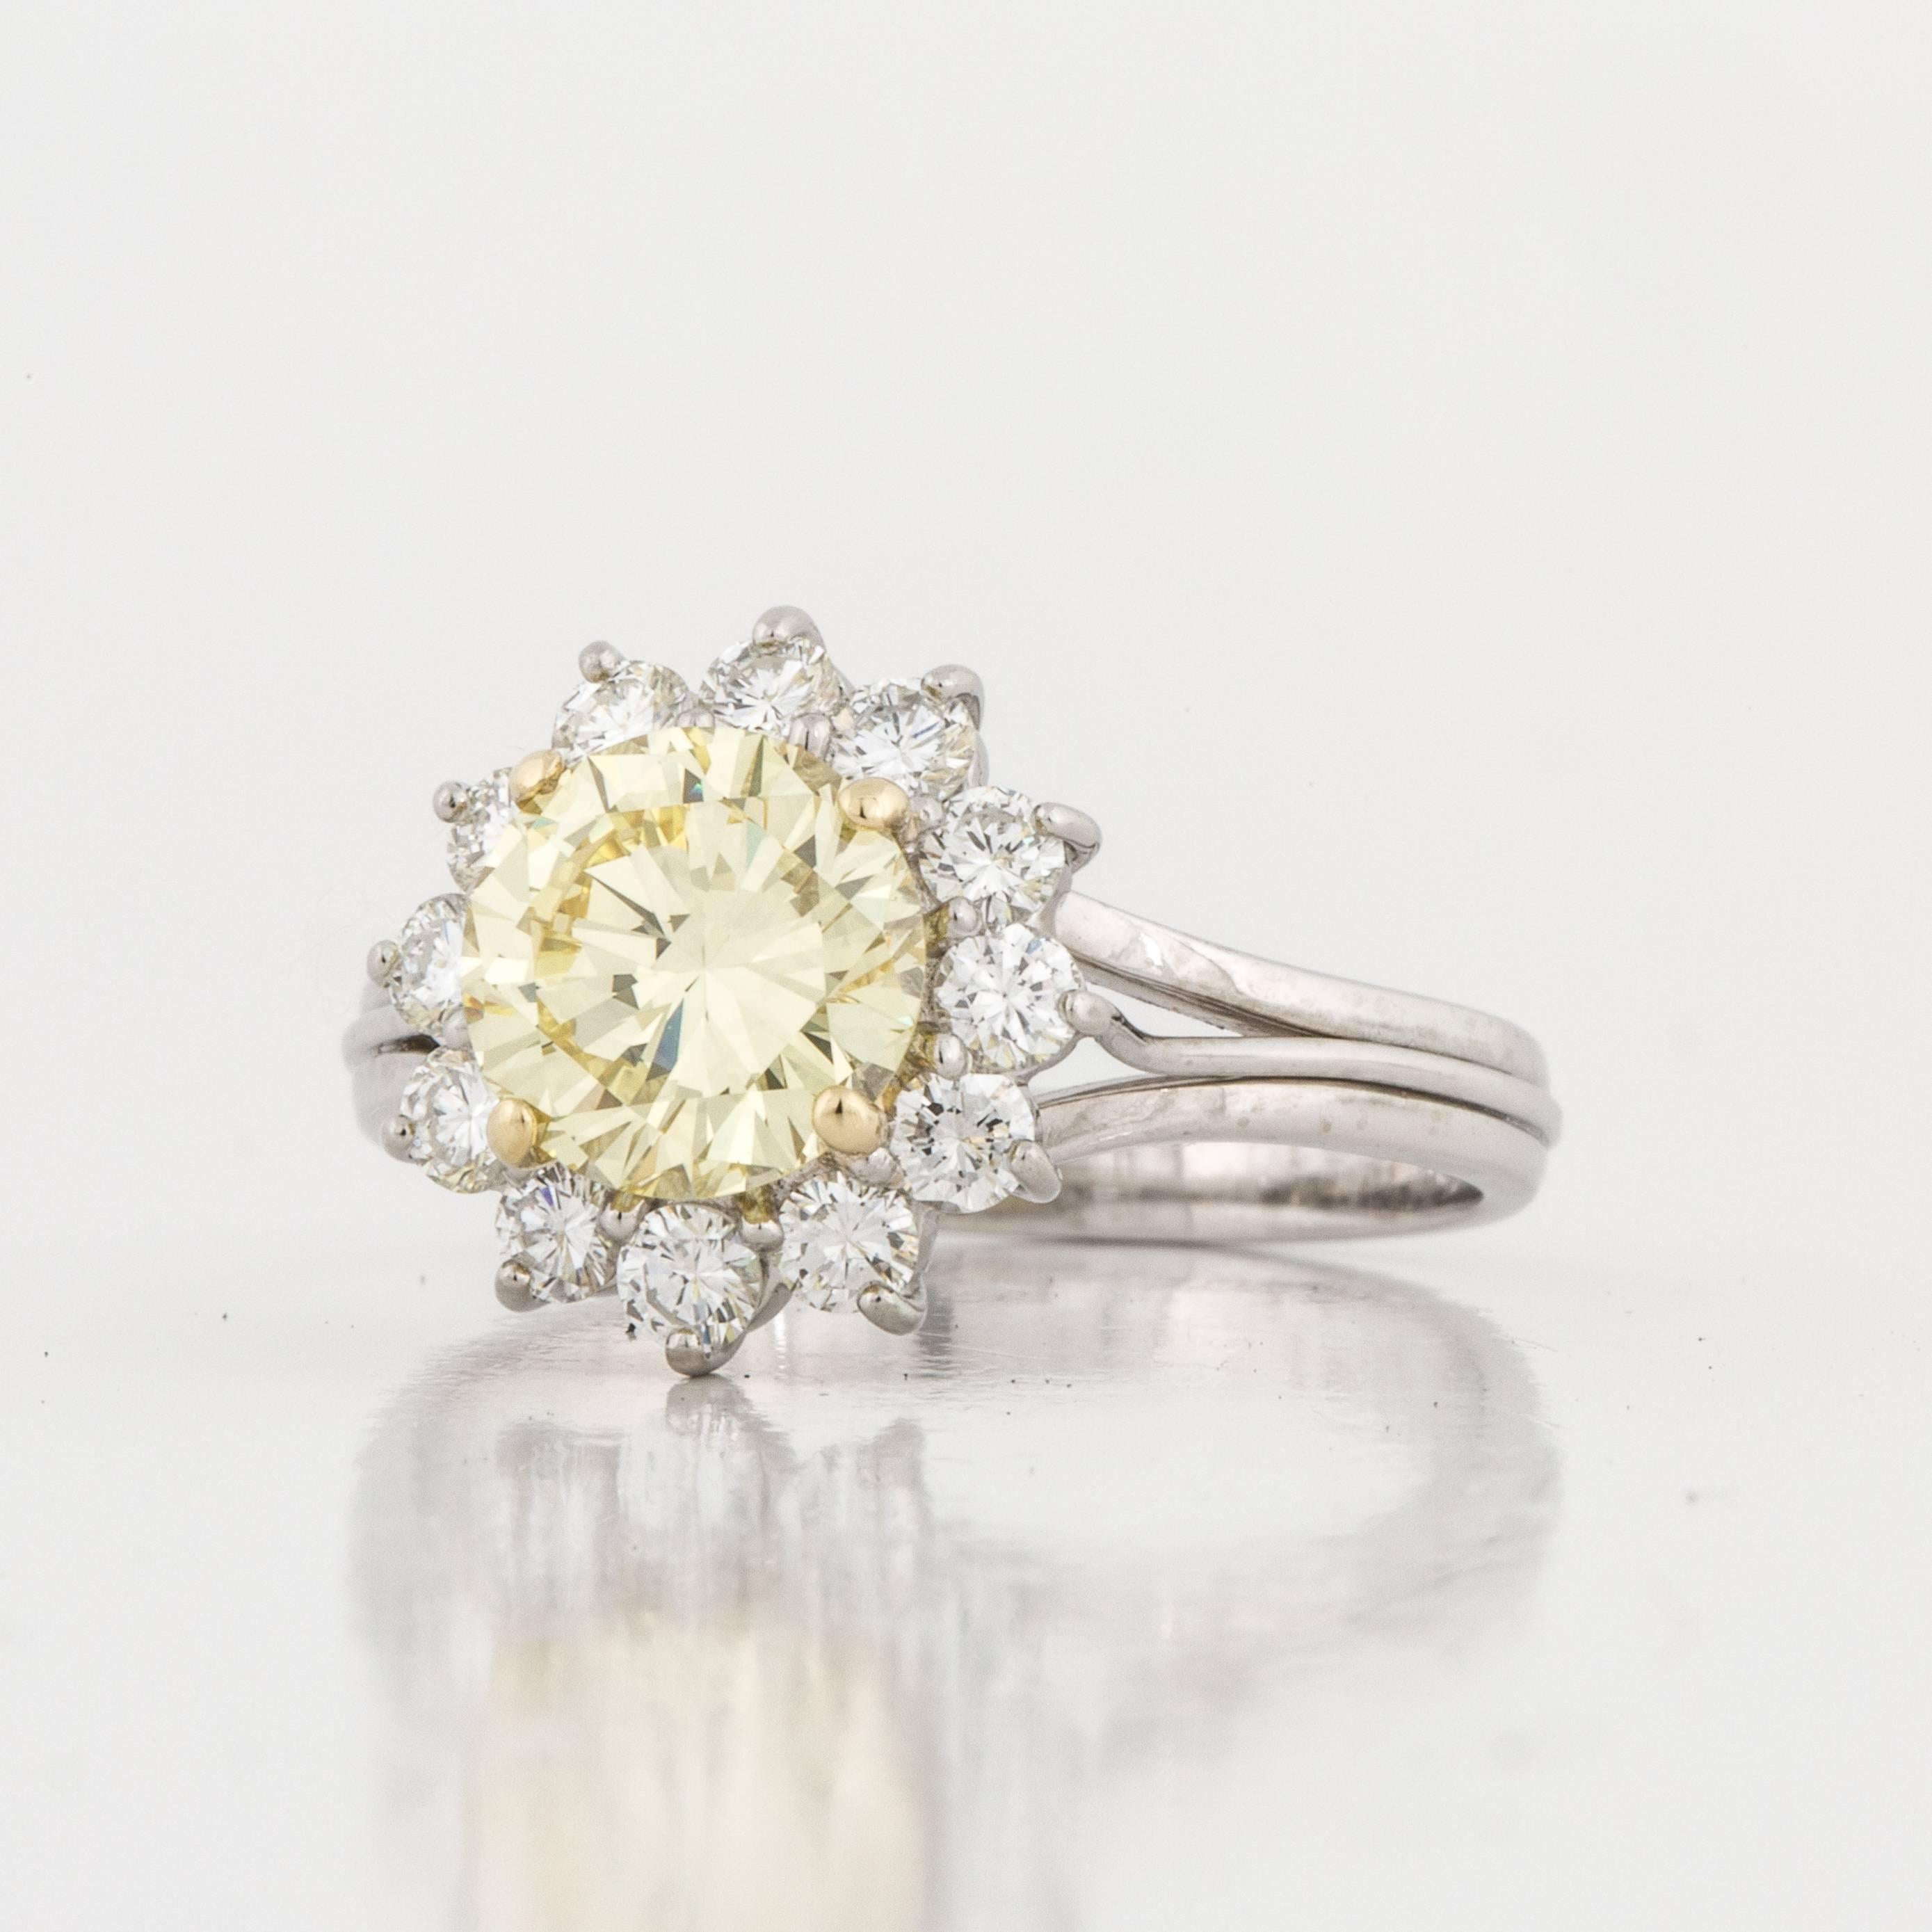 Tiffany & Co. ring composed of platinum featuring a fancy intense yellow diamond surrounded by white diamonds.  The ring is marked 